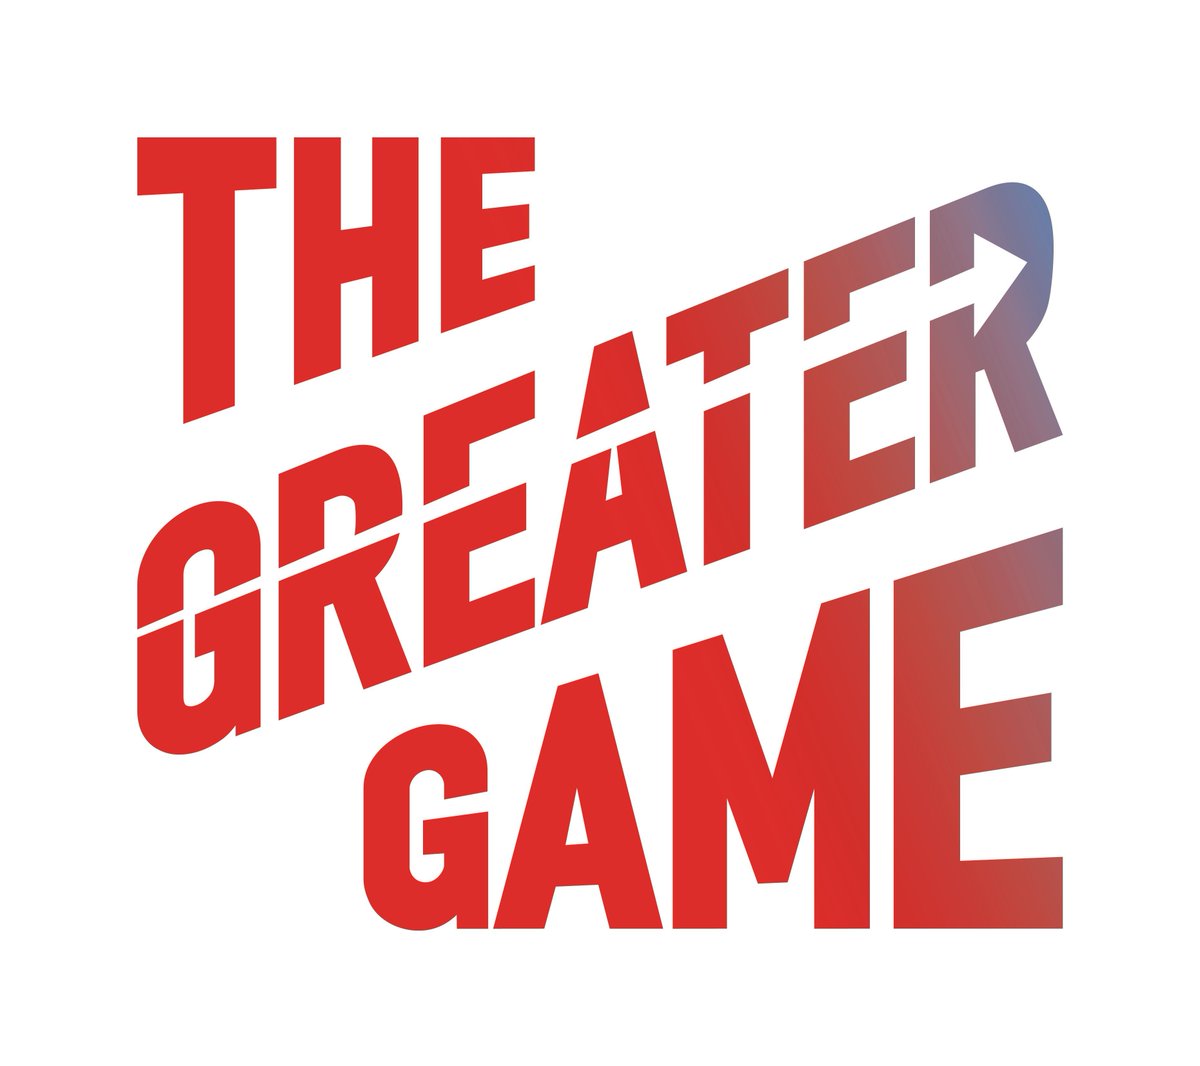 #TheGreaterGame is inspiring 12-16s to improve their health, providing accessible, football-inspired games for young people: bit.ly/GrtrGmEss @FA @NuffieldHealth @marksandspencer